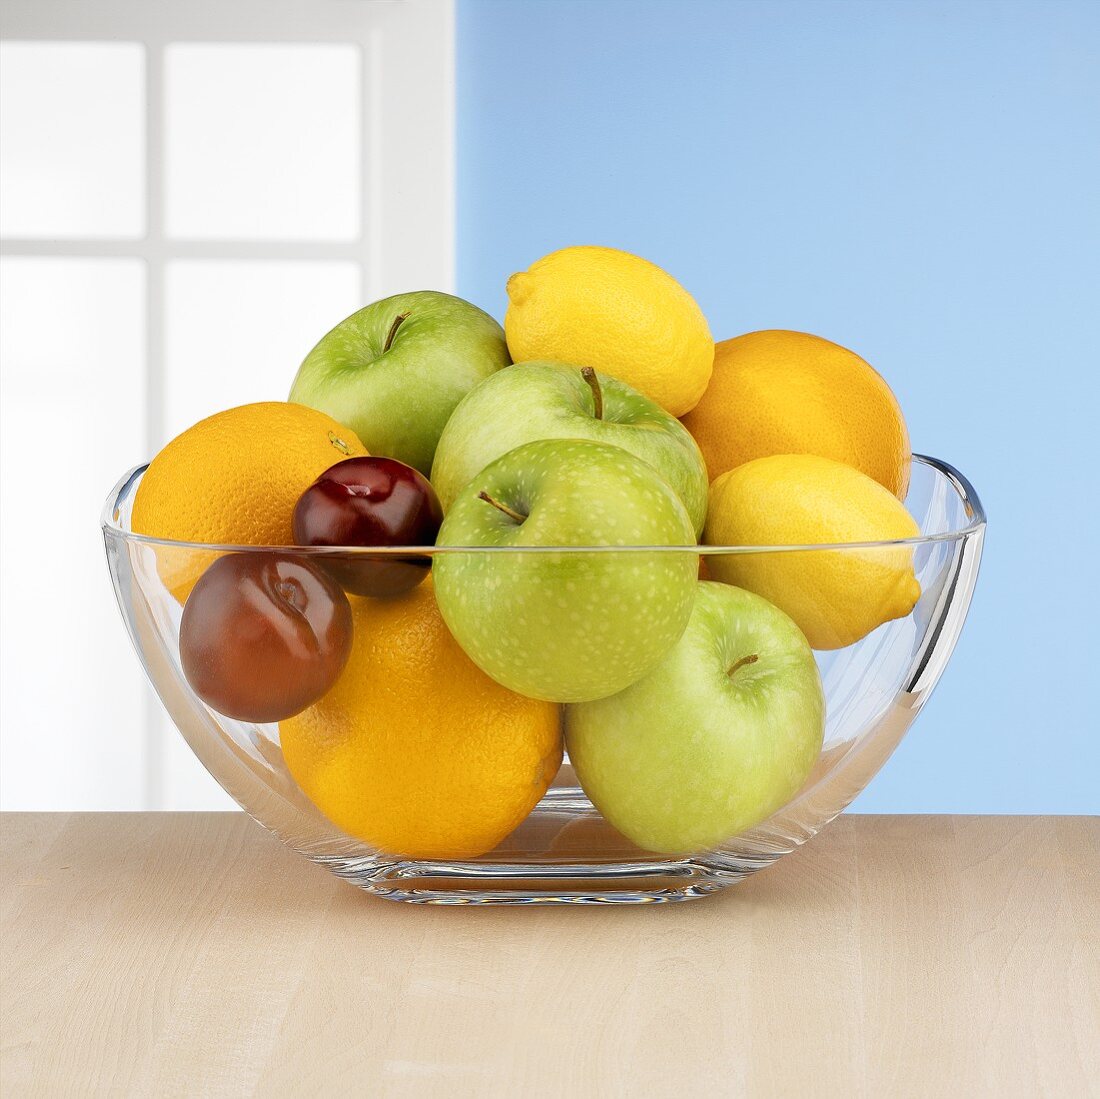 Fresh fruit in glass bowl in front of window